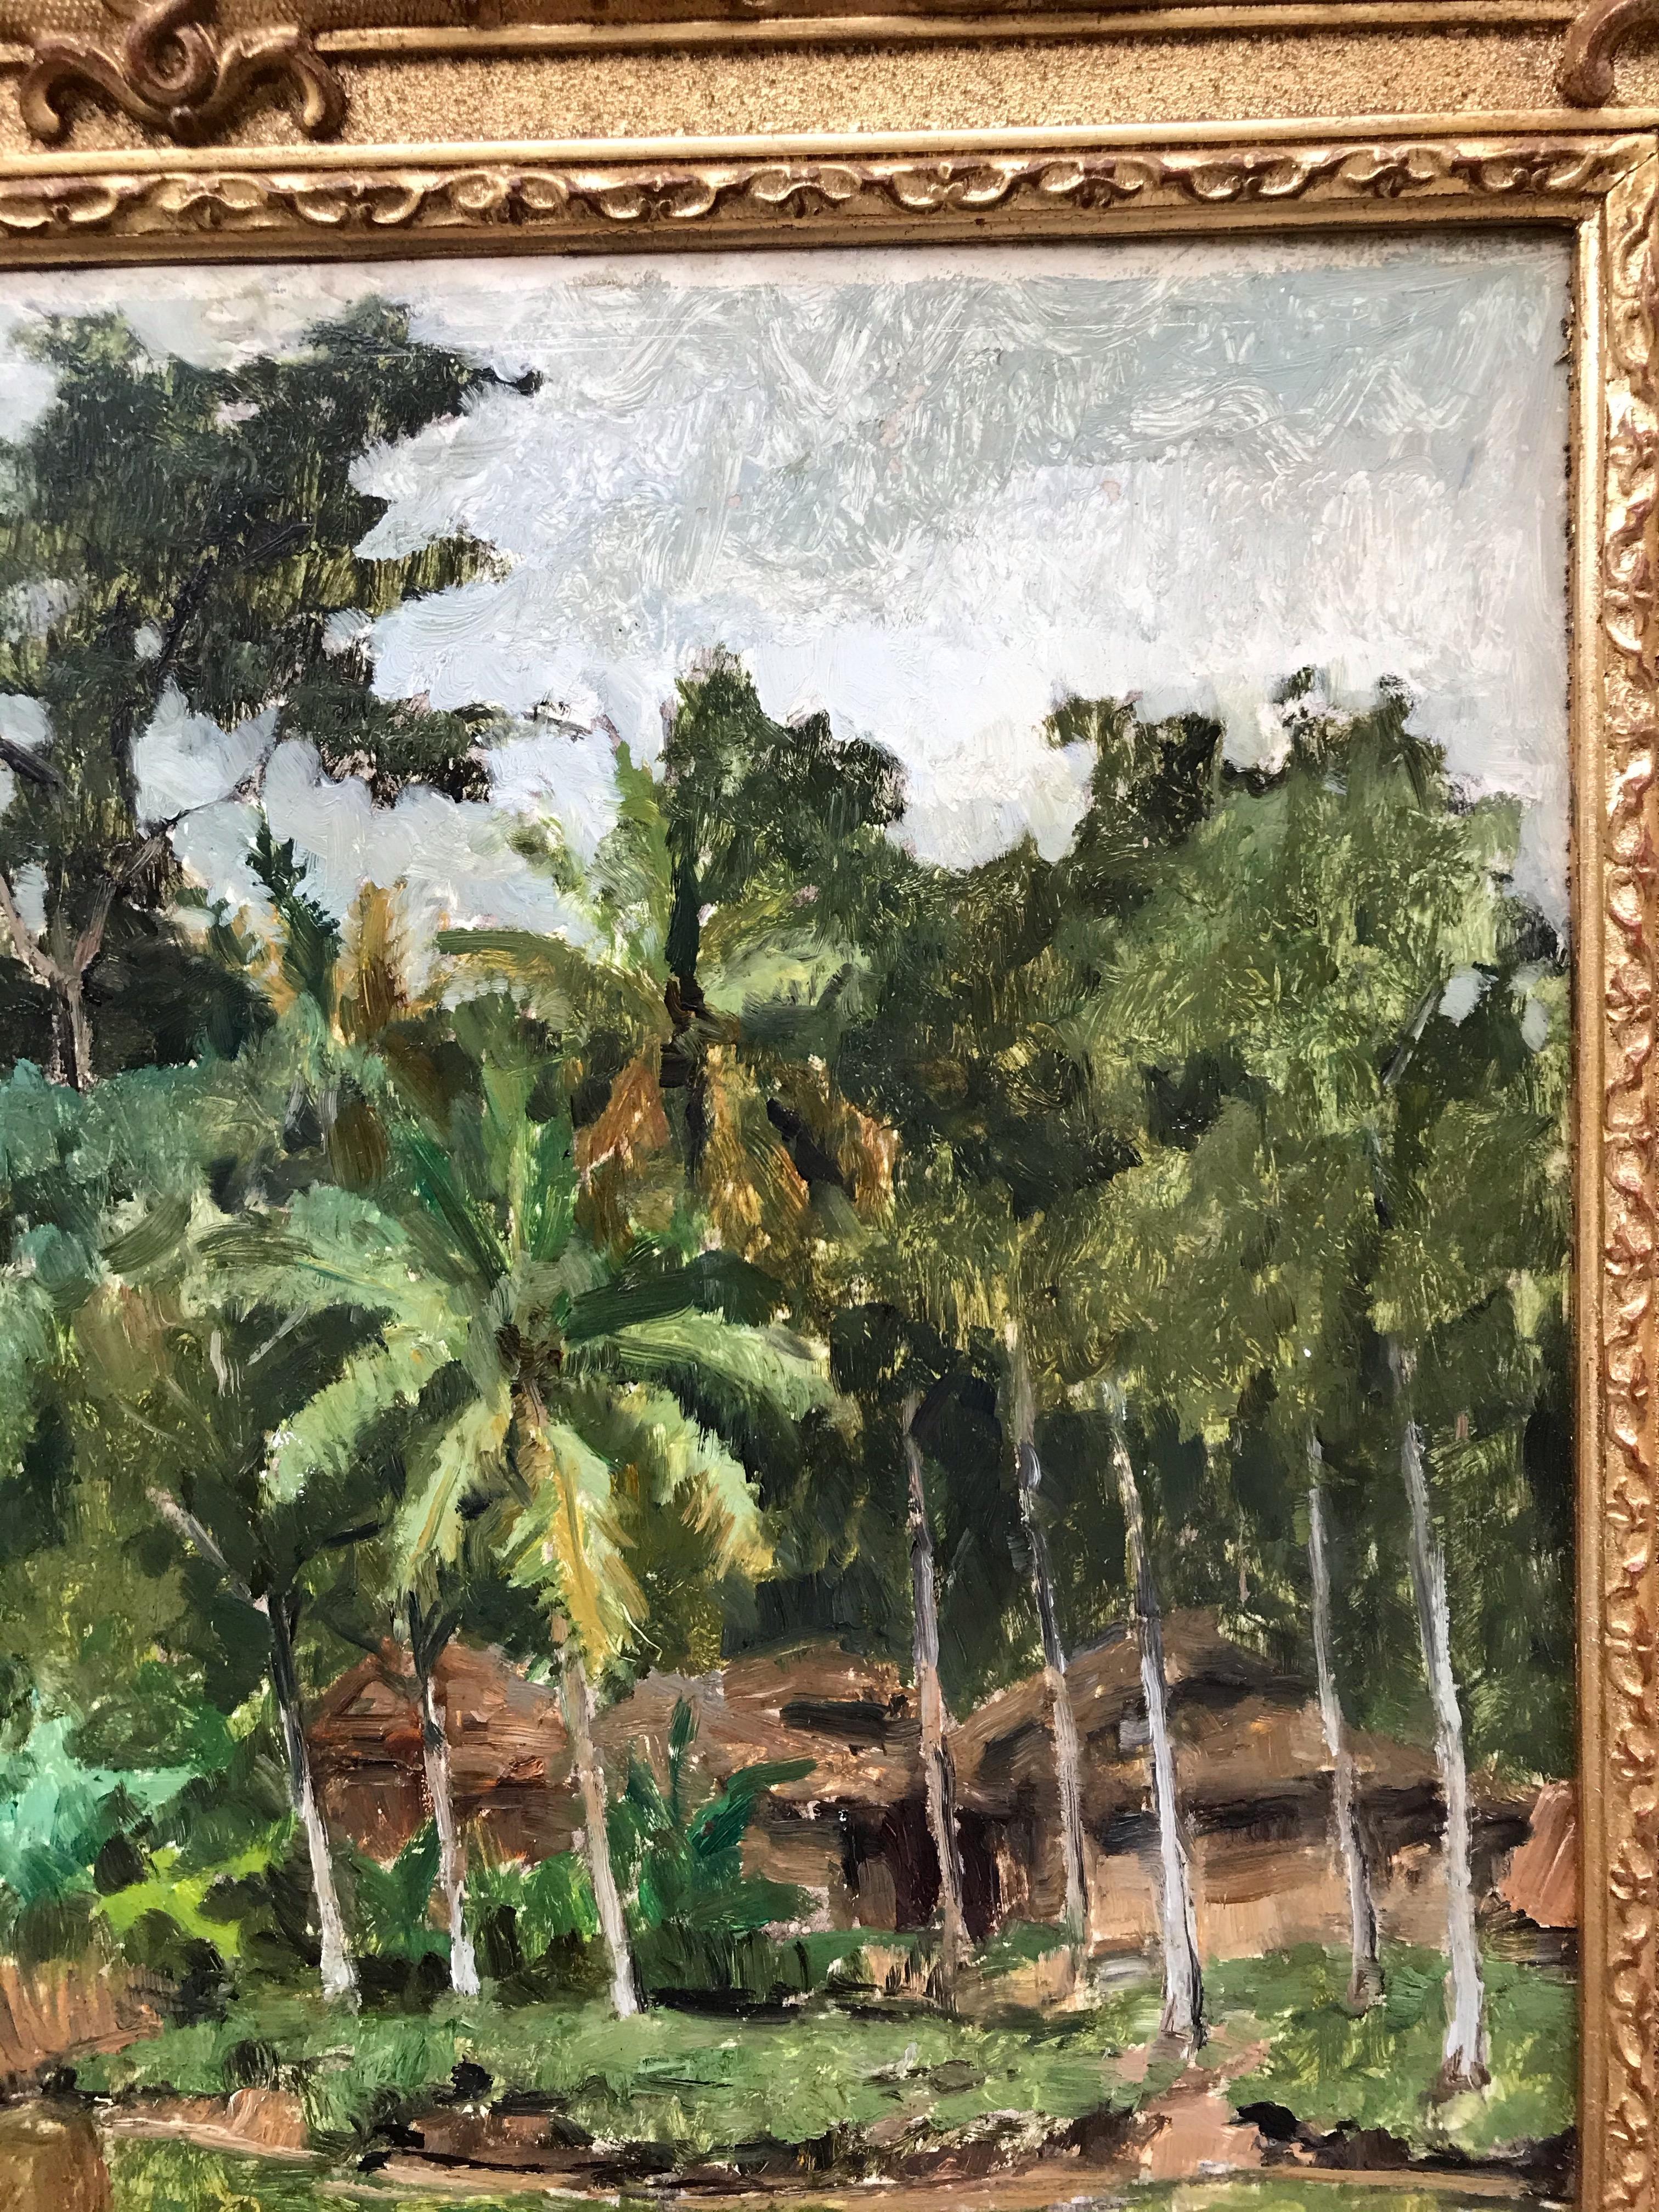 Jungle by the River - Original Old painting   - Academic Painting by Willy VON PLESSEN